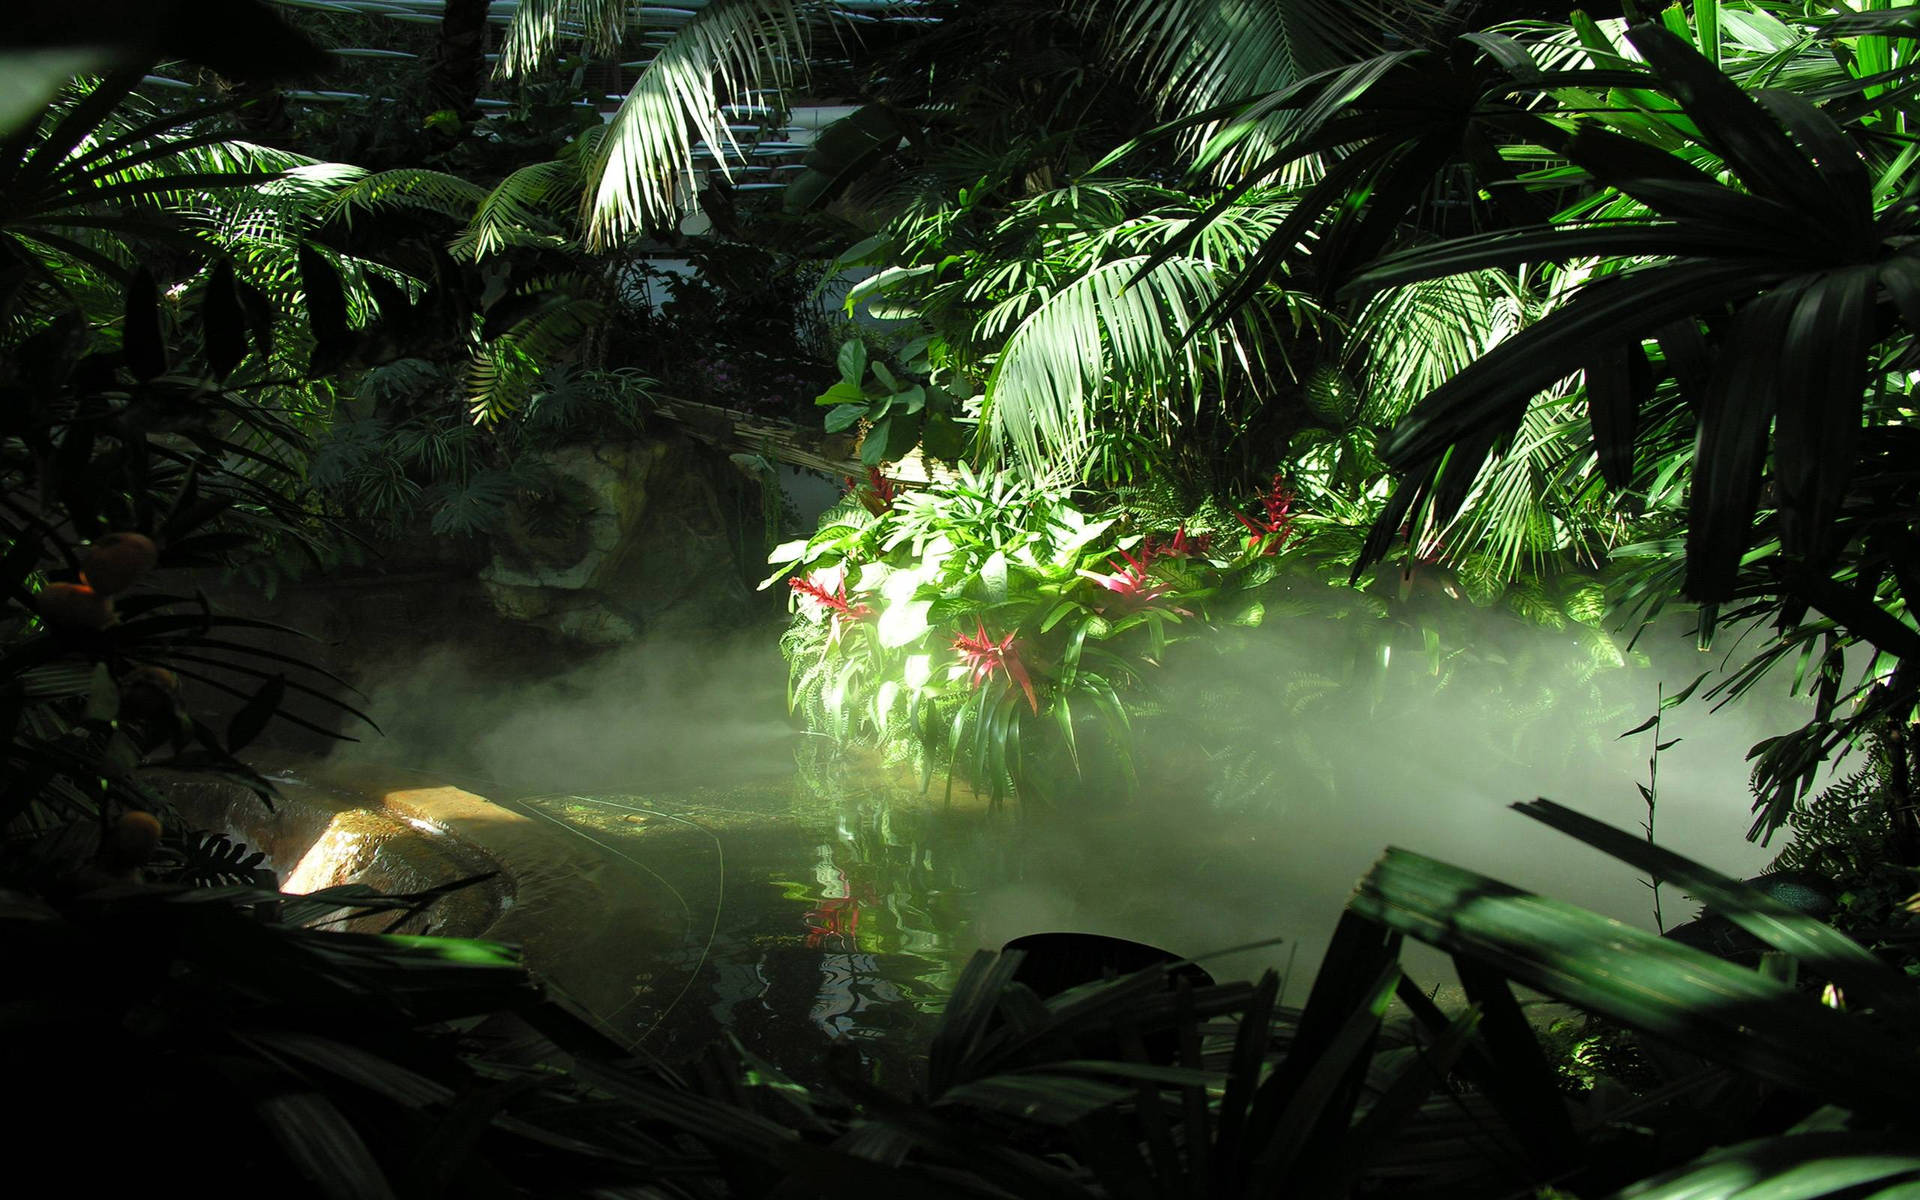 Take in the beauty of the enchanted Jungle! Wallpaper